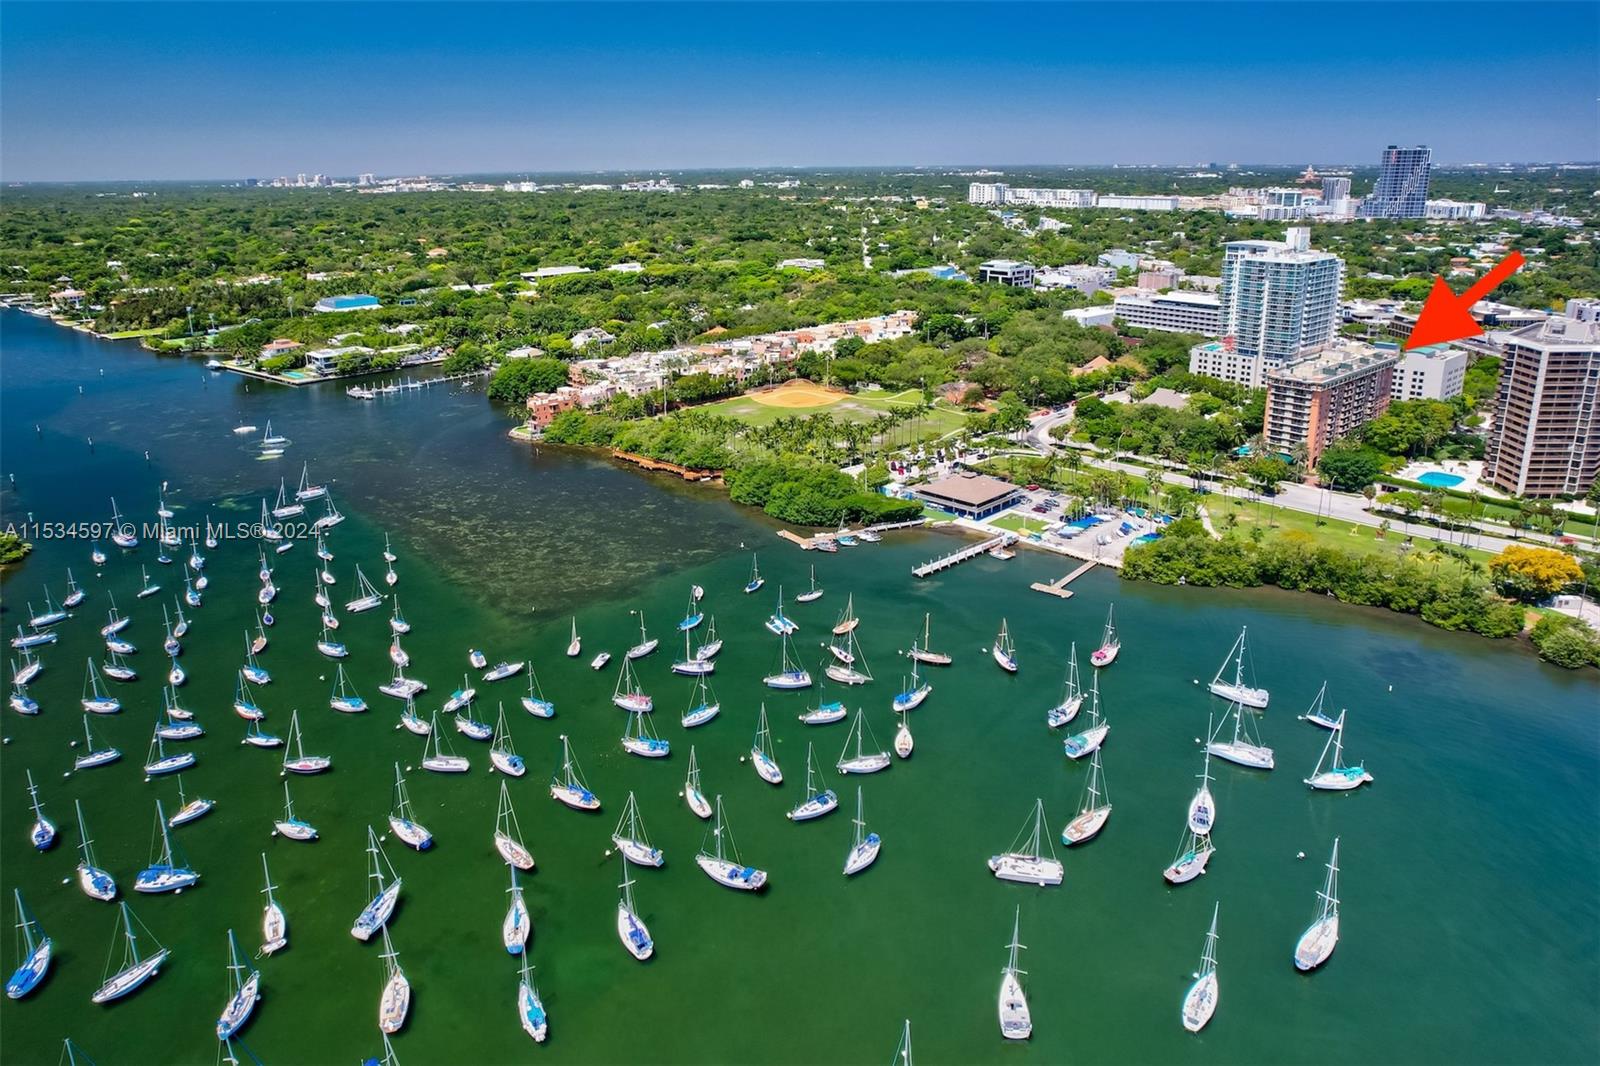 Welcome to your bayside paradise in Coconut Grove. This beautiful 1 bed/1
bath unit was completely renovated in 2020 and features quartz kitchen
countertops with a waterfall edge, designer glass tile backsplash and LG
stainless steel appliances. Thirty-inch square Spanish porcelain floor tiles
flow throughout. The bathroom features a quartz countertop double vanity,
natural stone/porcelain tile shower and high-end fixtures. Generous closets
and full-service amenities make this a wonderful home, investment
opportunity or pied-à-terre. View the Miami skyline, Key Biscayne and the
Bay from your private balcony. Located in the heart of the Grove, The Mutiny
is steps away from the shops, dining, boating and entertainment that Miami's
most sought-after neighborhood has to offer.